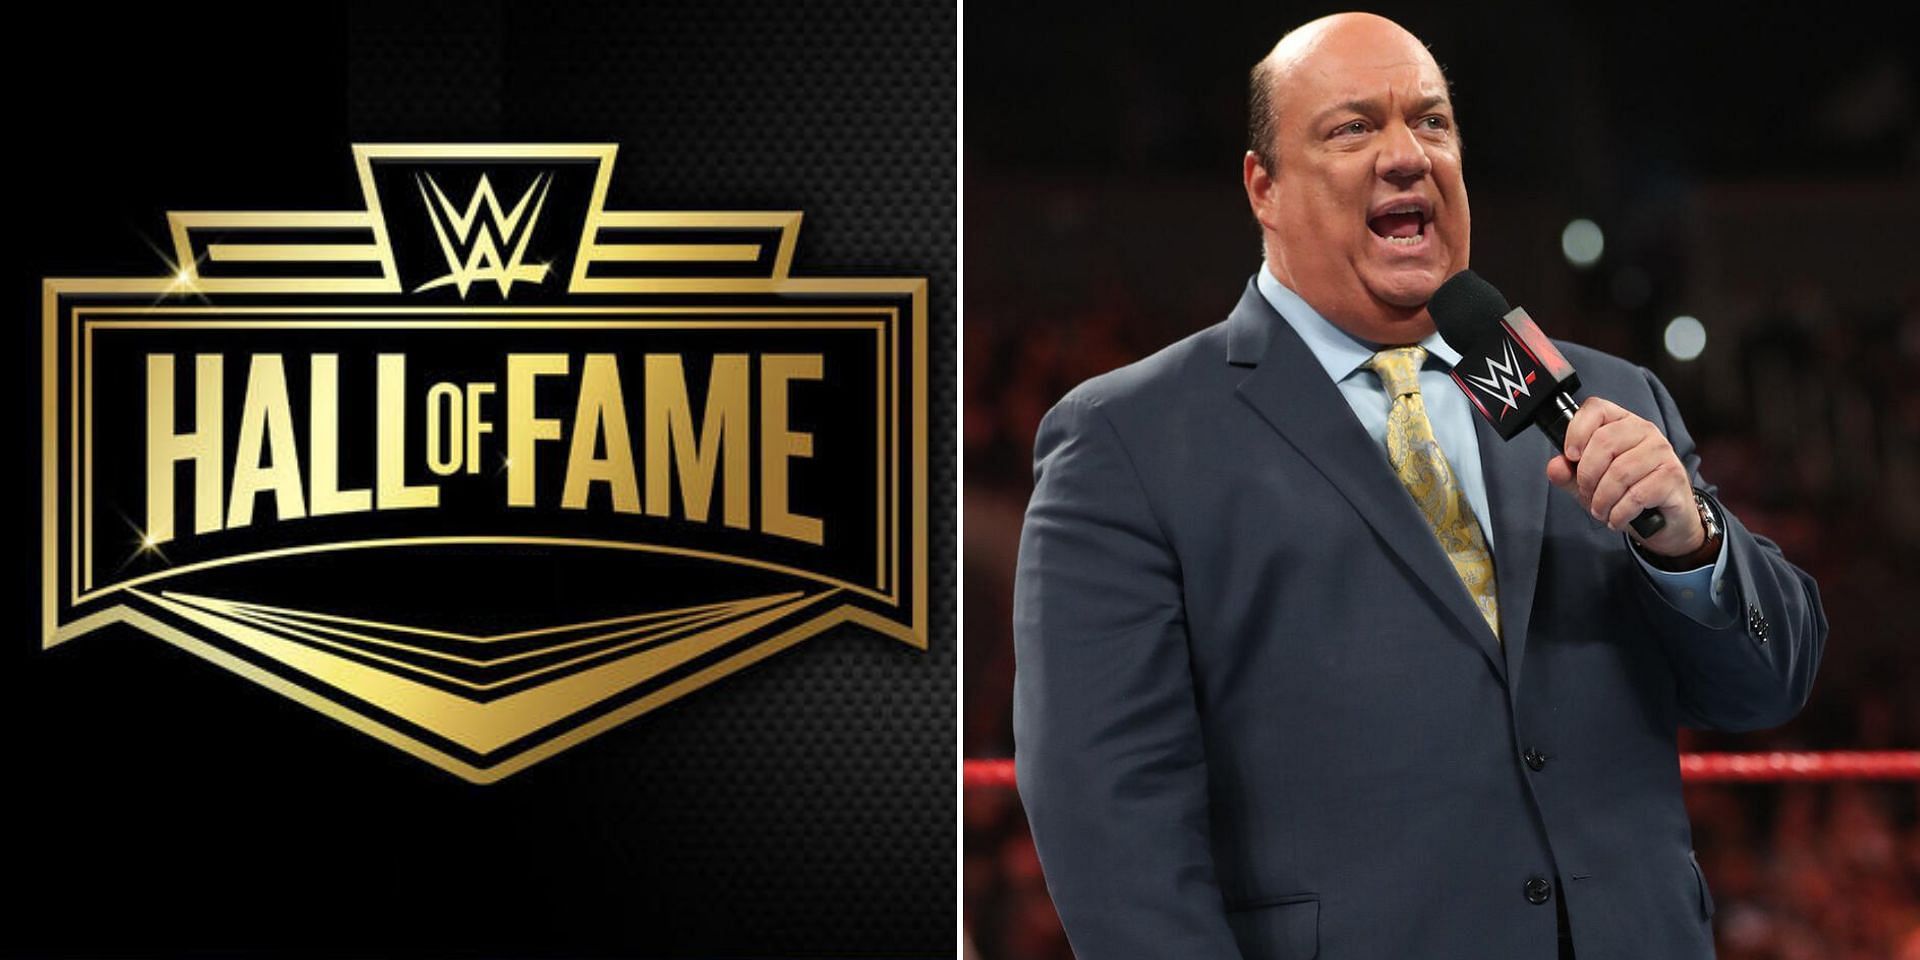 Paul Heyman will inducted into the WWE Hall of Fame